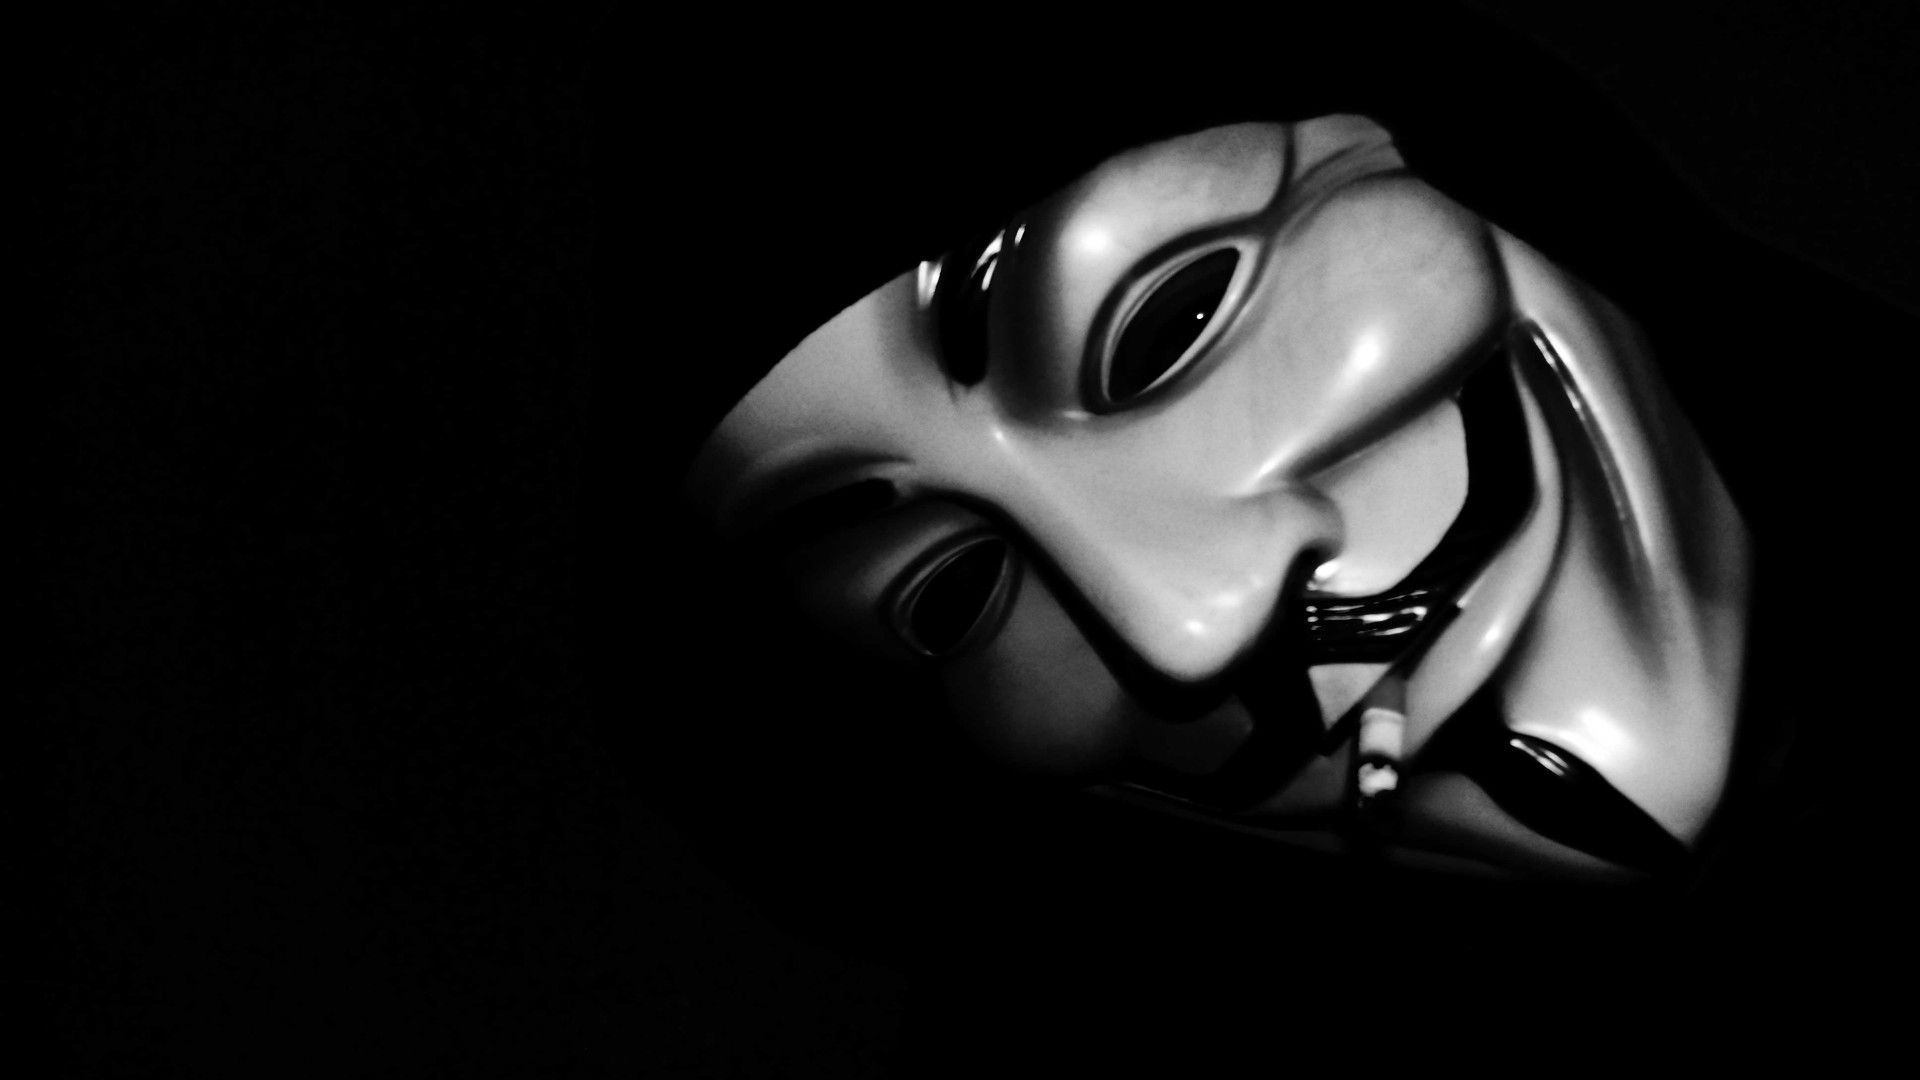 Cool Anonymous Mask Wallpapers